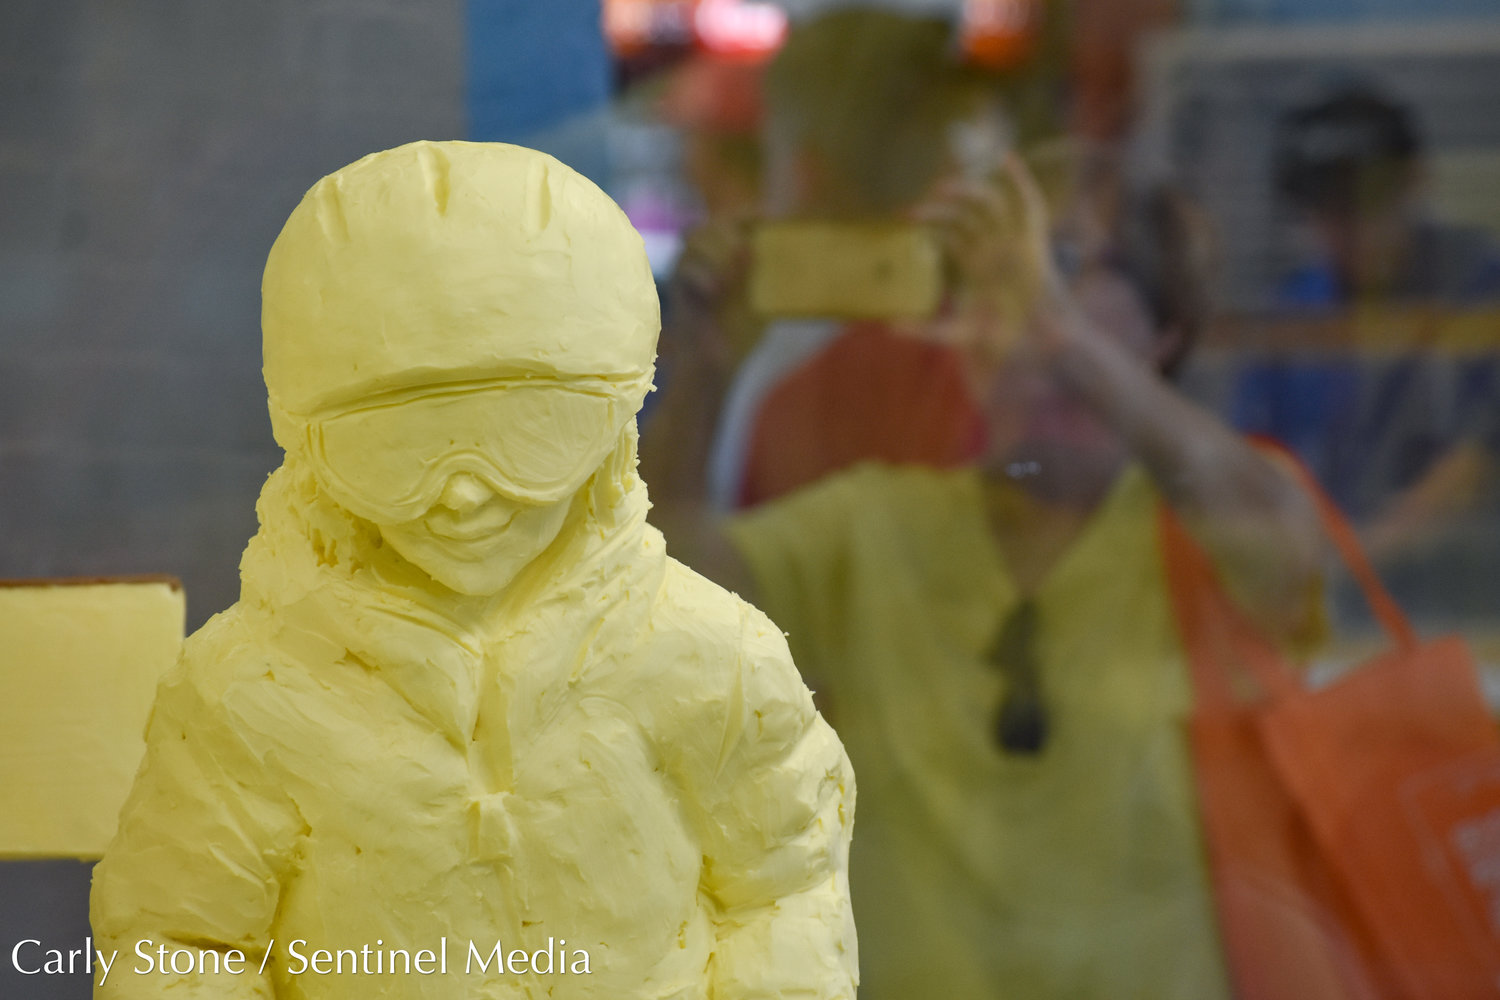 The butter sculpture at this year’s NYS Fair is titled, “Refuel Her Greatness – Celebrating the 50th Anniversary of Title IX.”